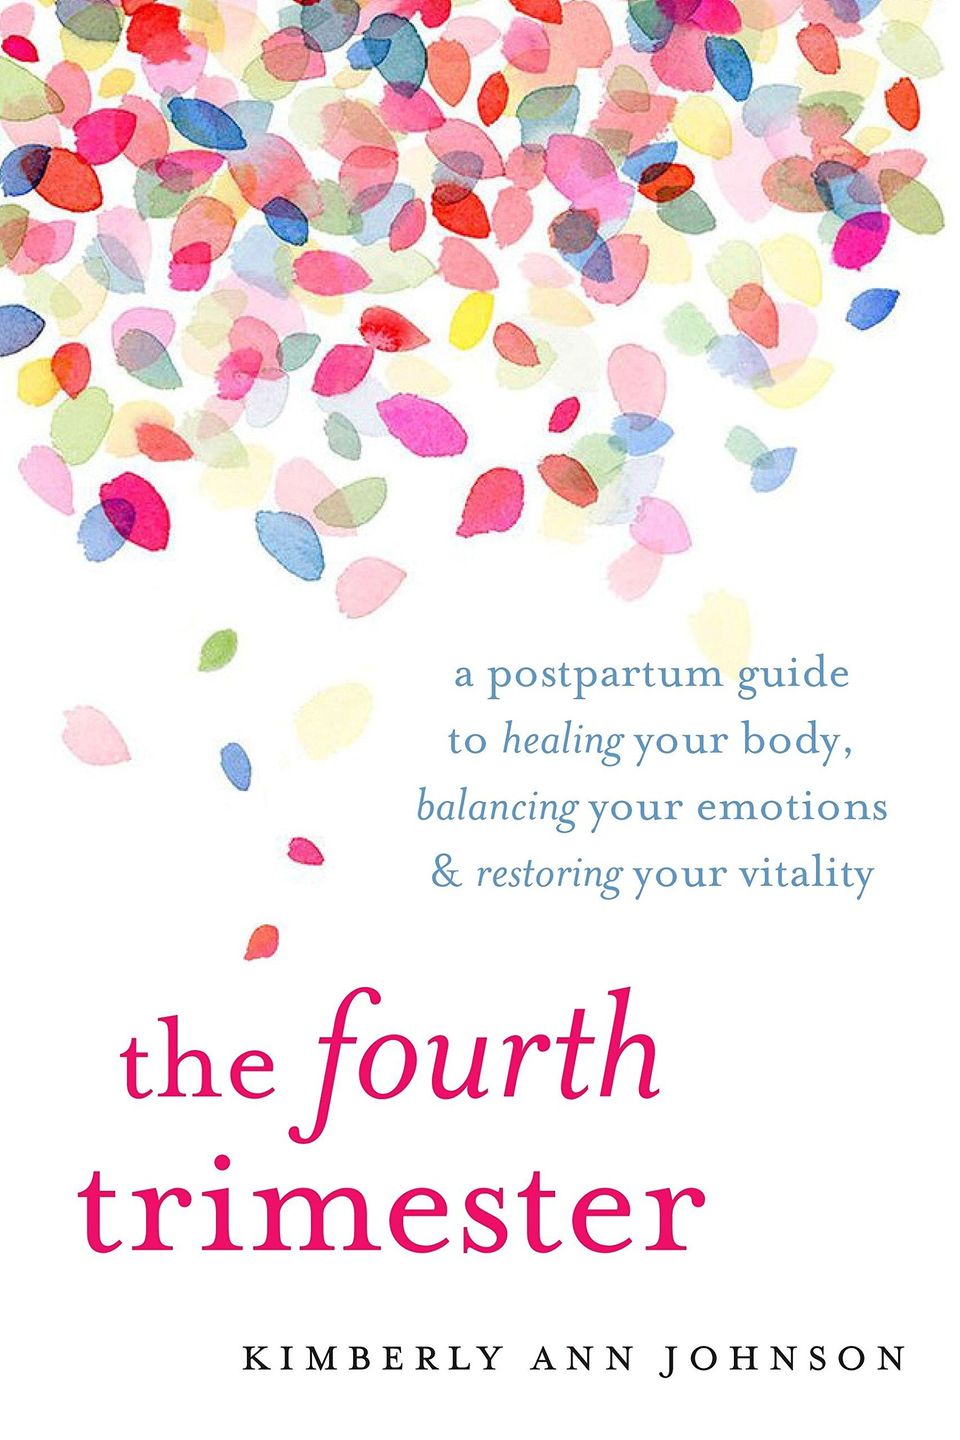 “The Fourth Trimester: A Postpartum Guide to Healing Your Body, Balancing Your Emotions, and Restoring Your Vitality” by Kimberly Ann Johnson